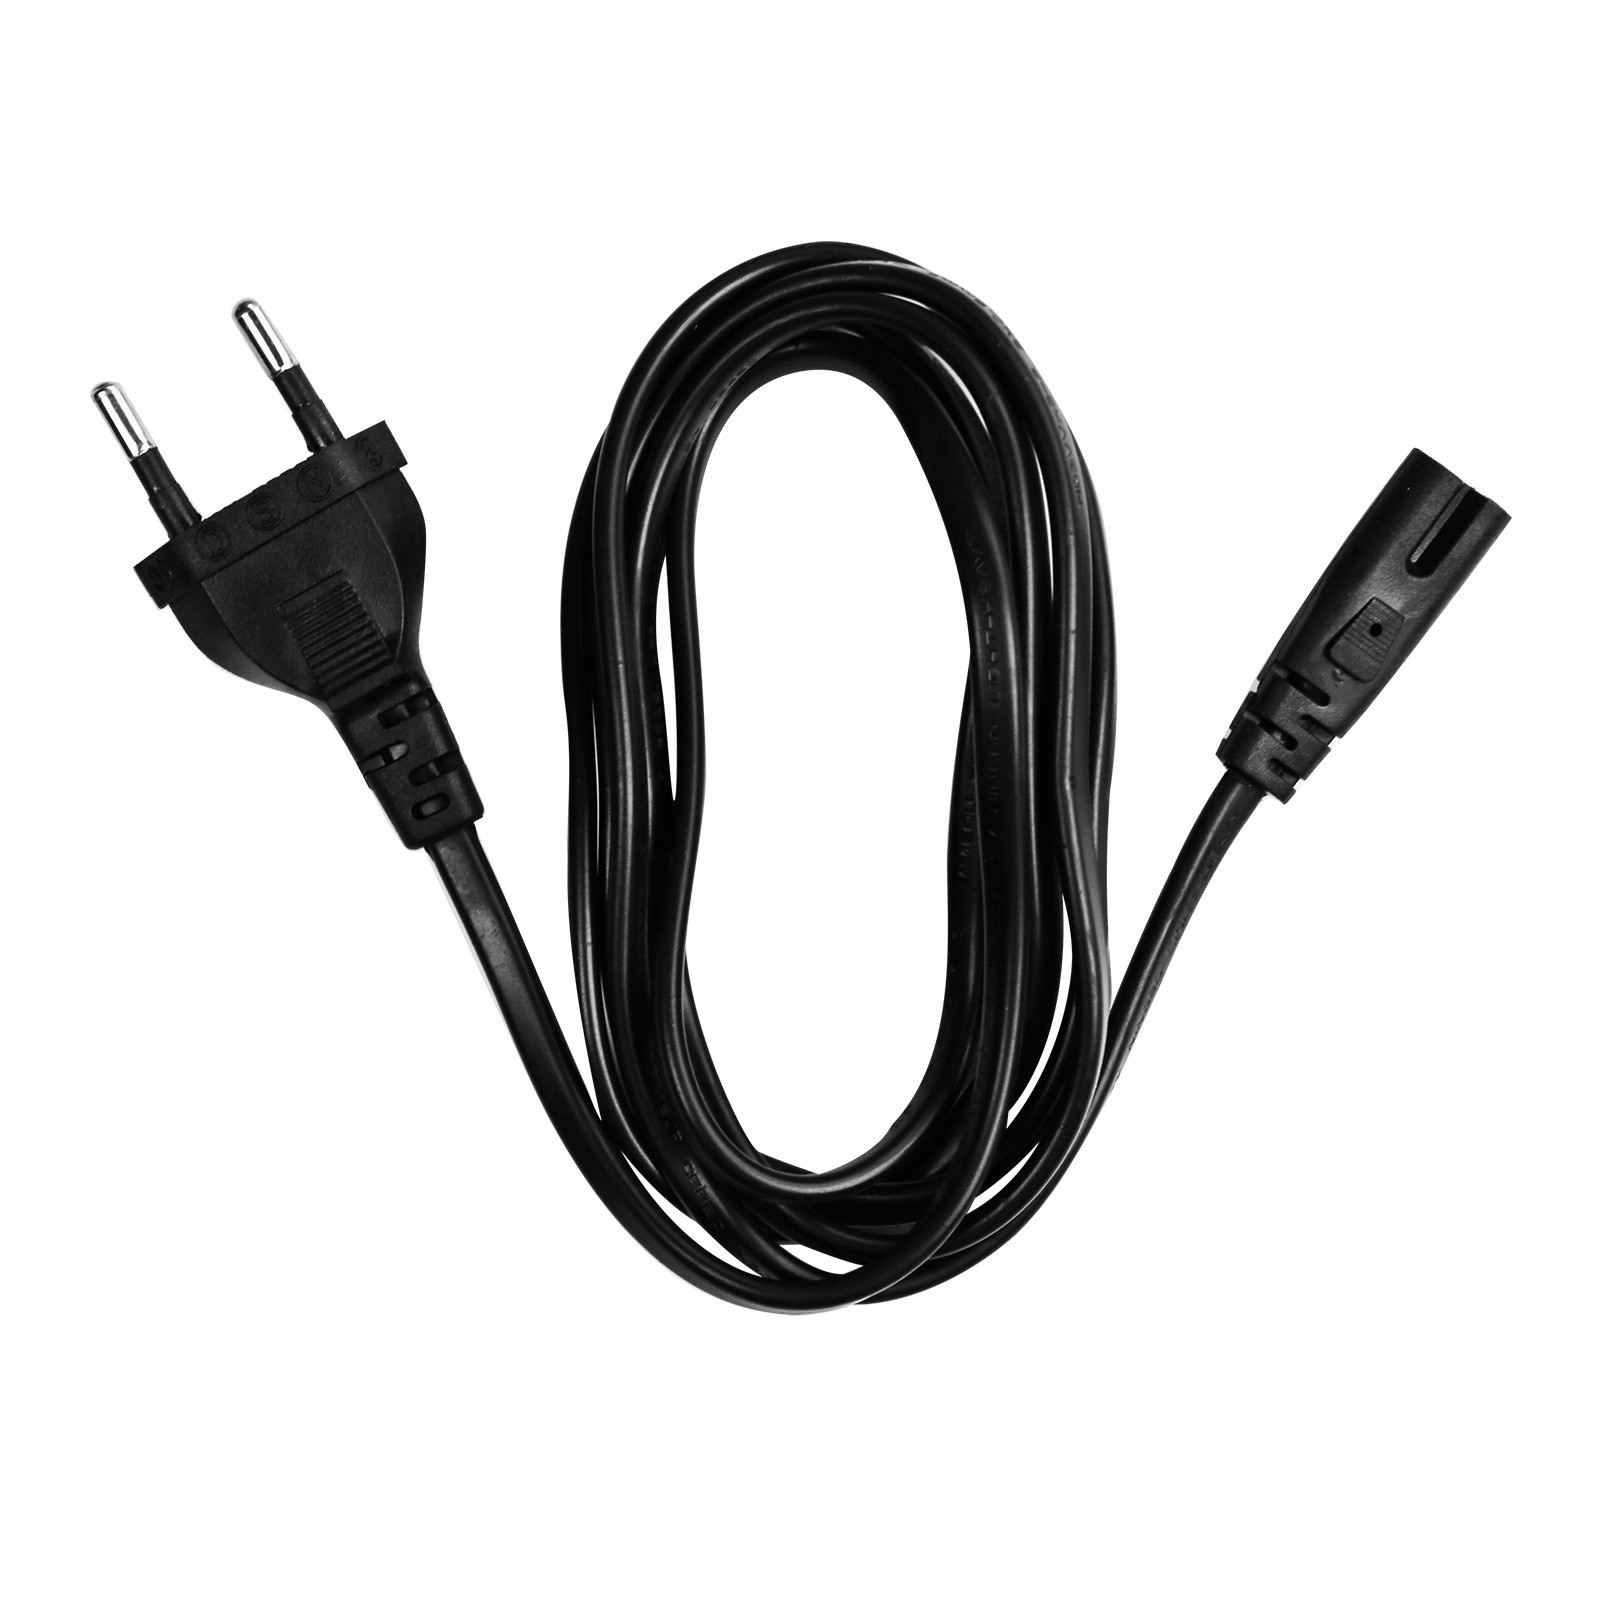 EKON Antenna cable 9,5 mm male to 9,5 mm female, black color,cable length 5 m + coax adapter male-male